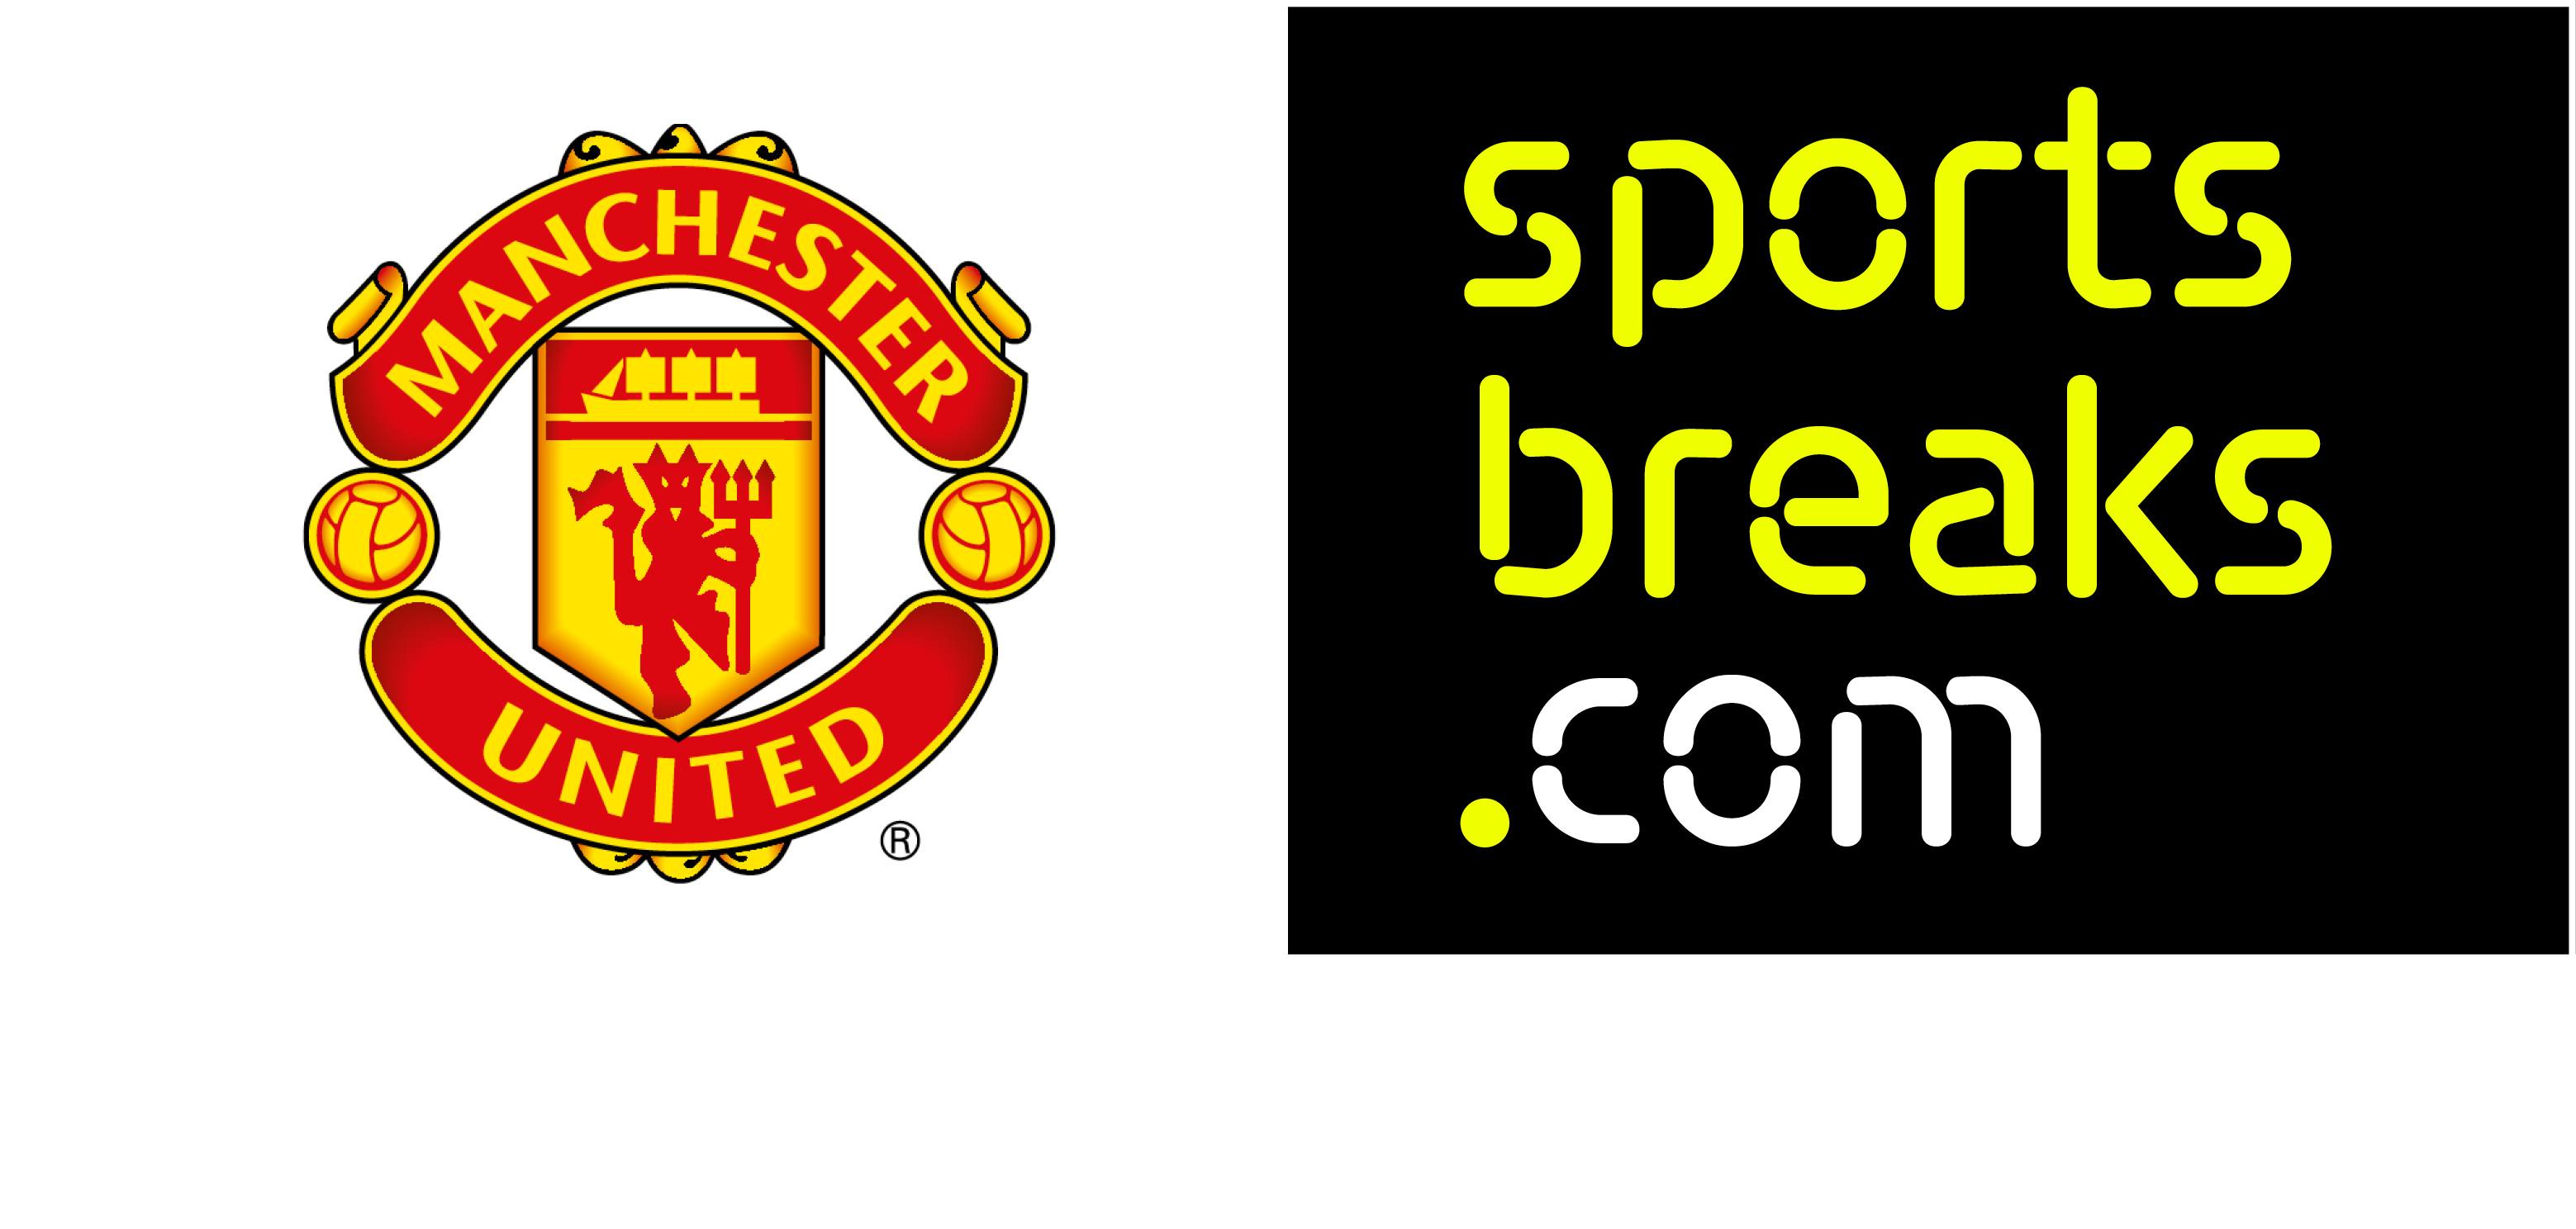 Official Manchester United Ticket & Hotel Breaks